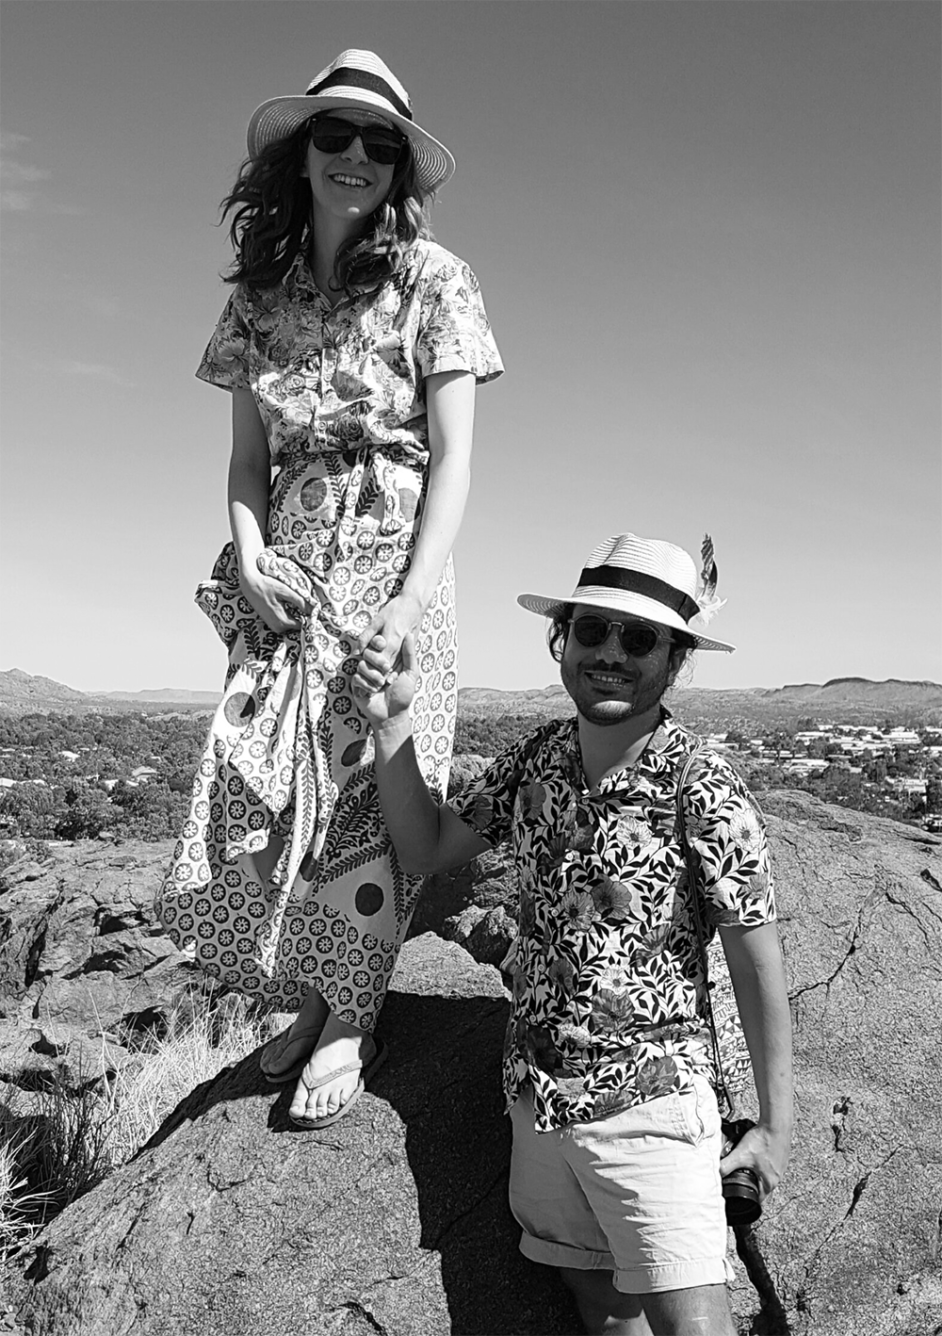 A photograph of a woman standing on a rock holding hands with a man who is below her, smiling to the camera.